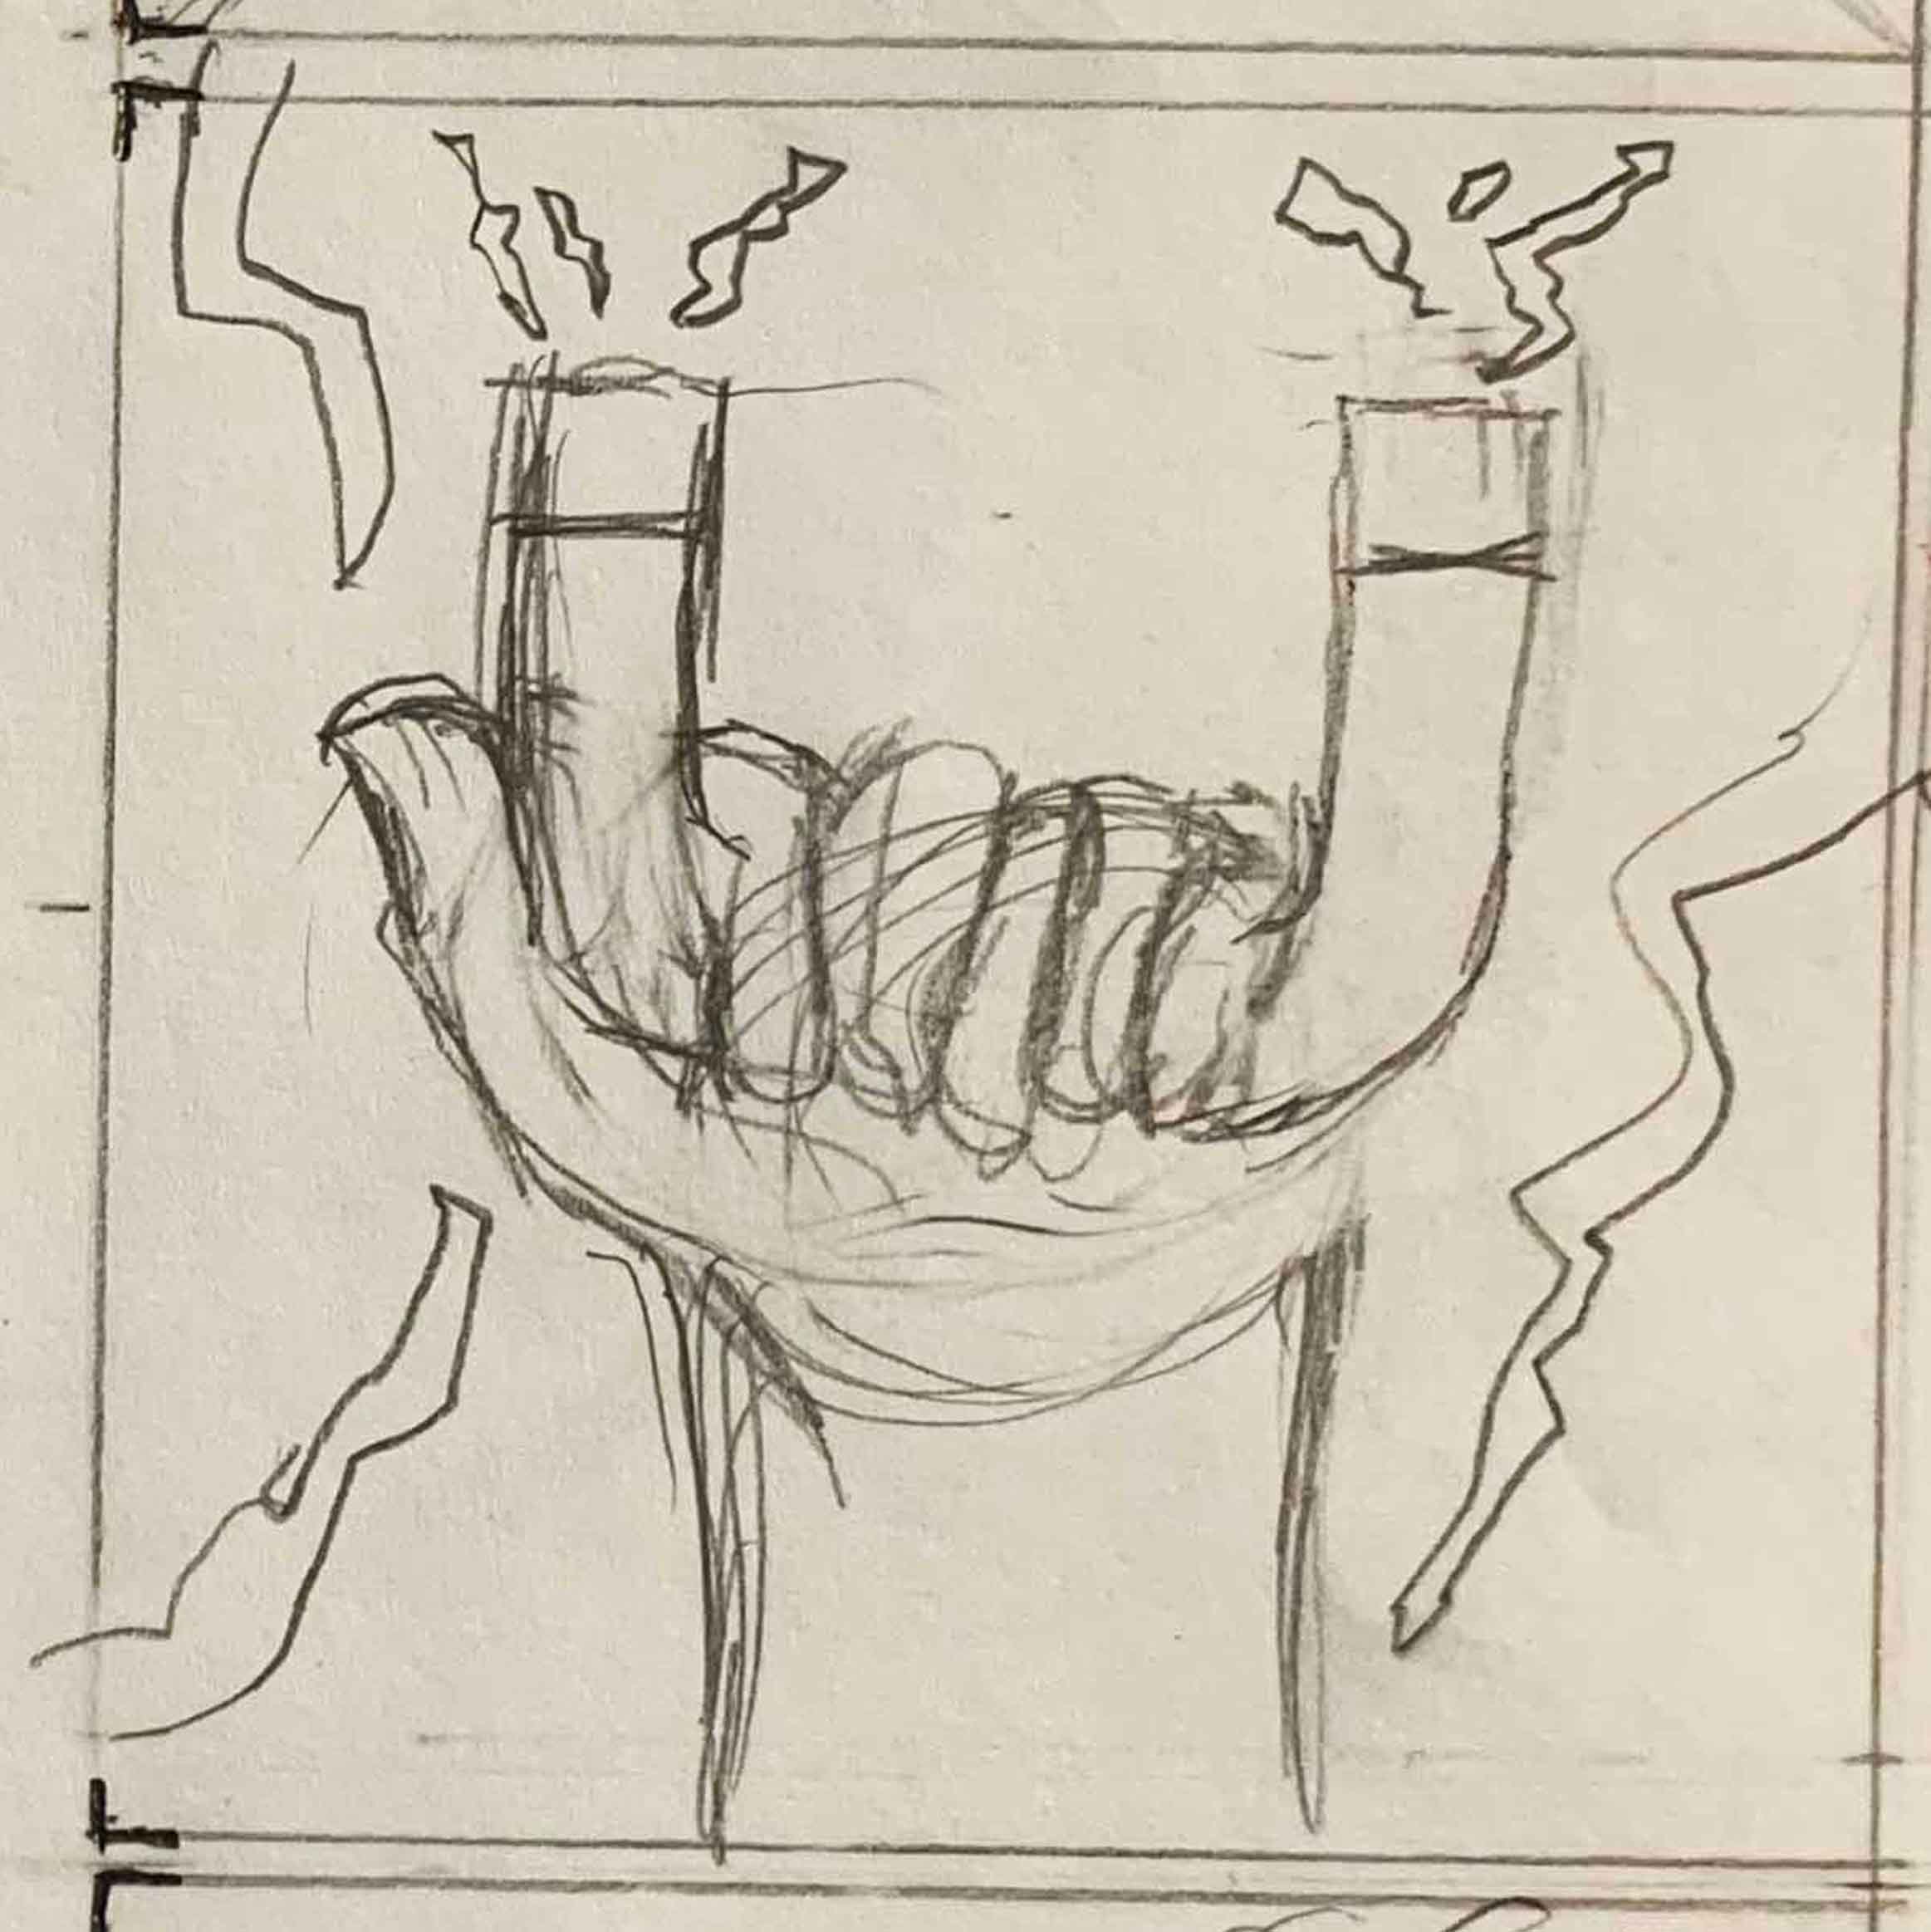 thumbnails for letter u drop cap. illustration of a u-shaped magnet held up by one hand attracting bolts of lighting